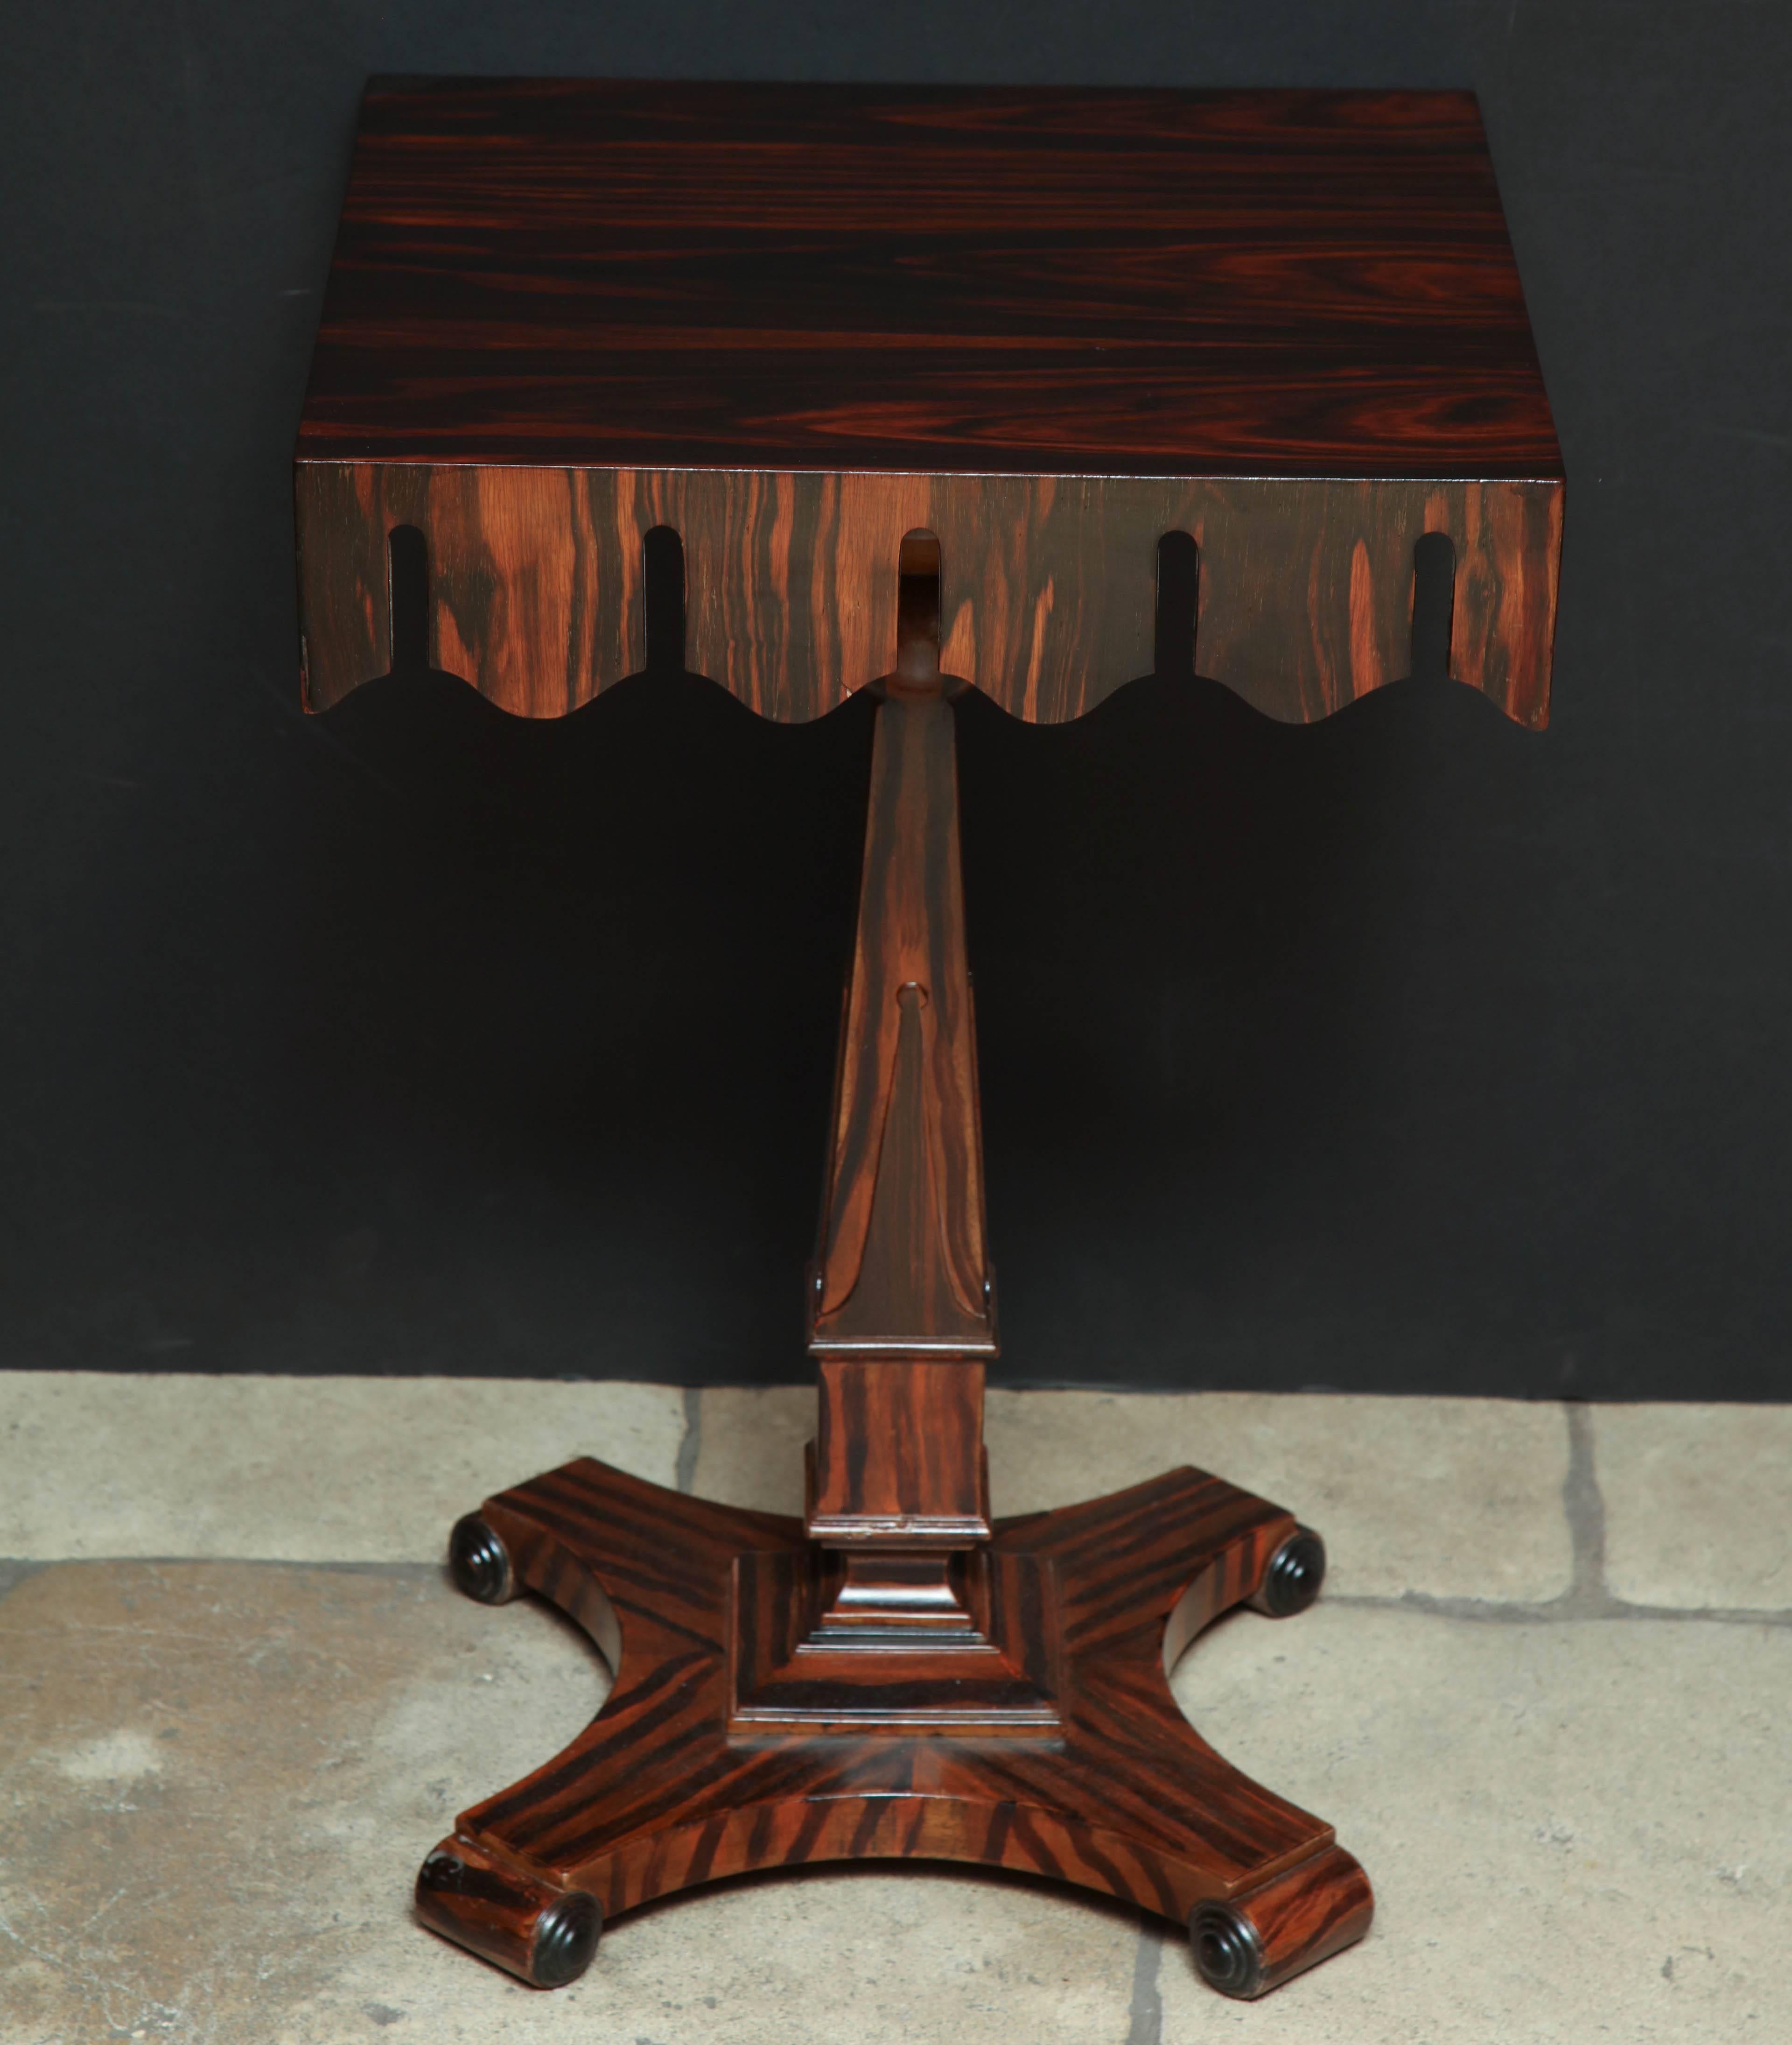 French Art Deco rosewood side table with scalloped rails and pedestal base.